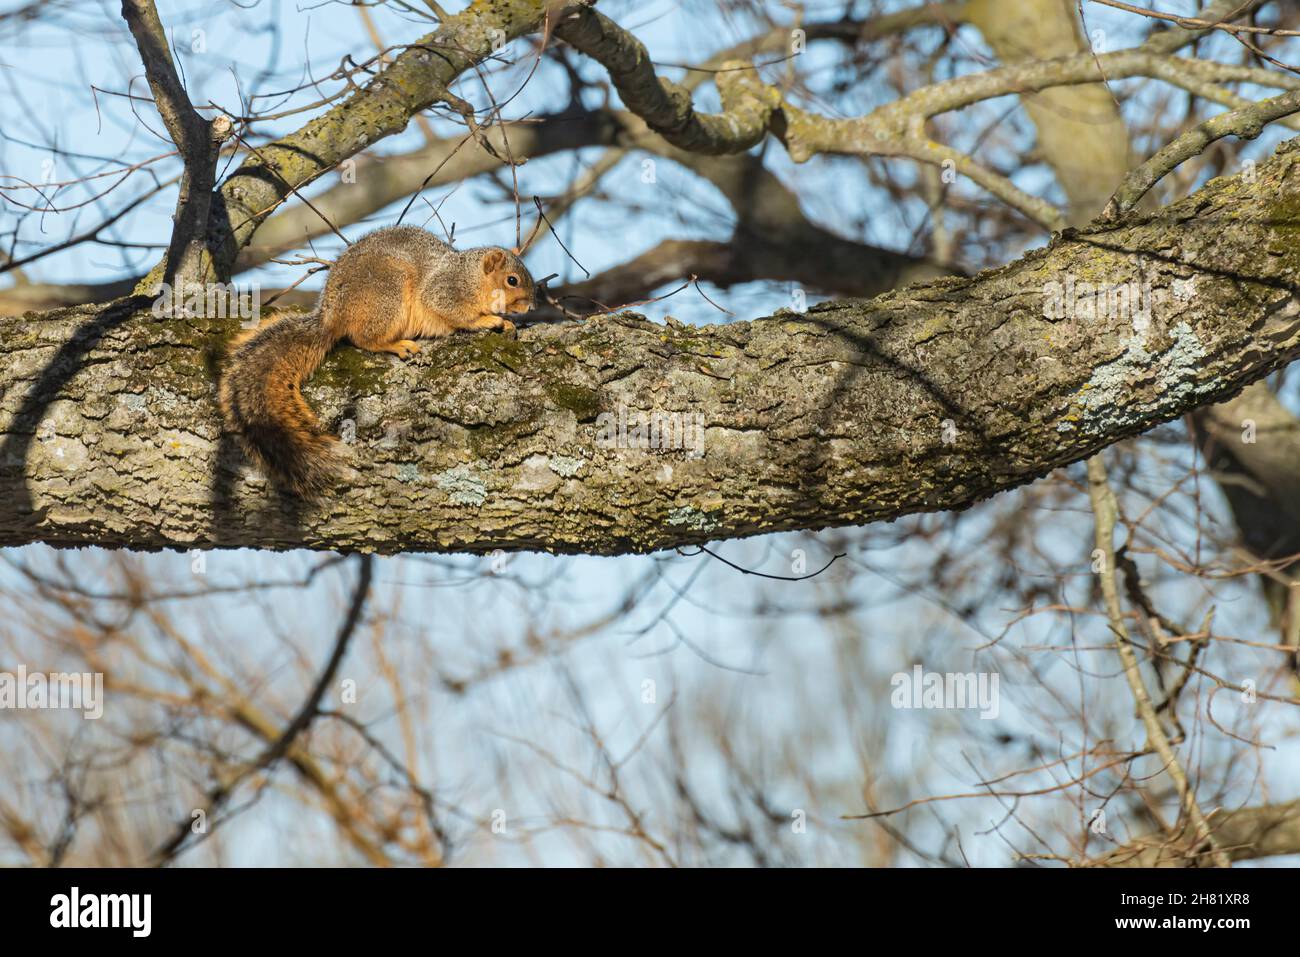 Fox squirrel sitting on a large tree branch Stock Photo